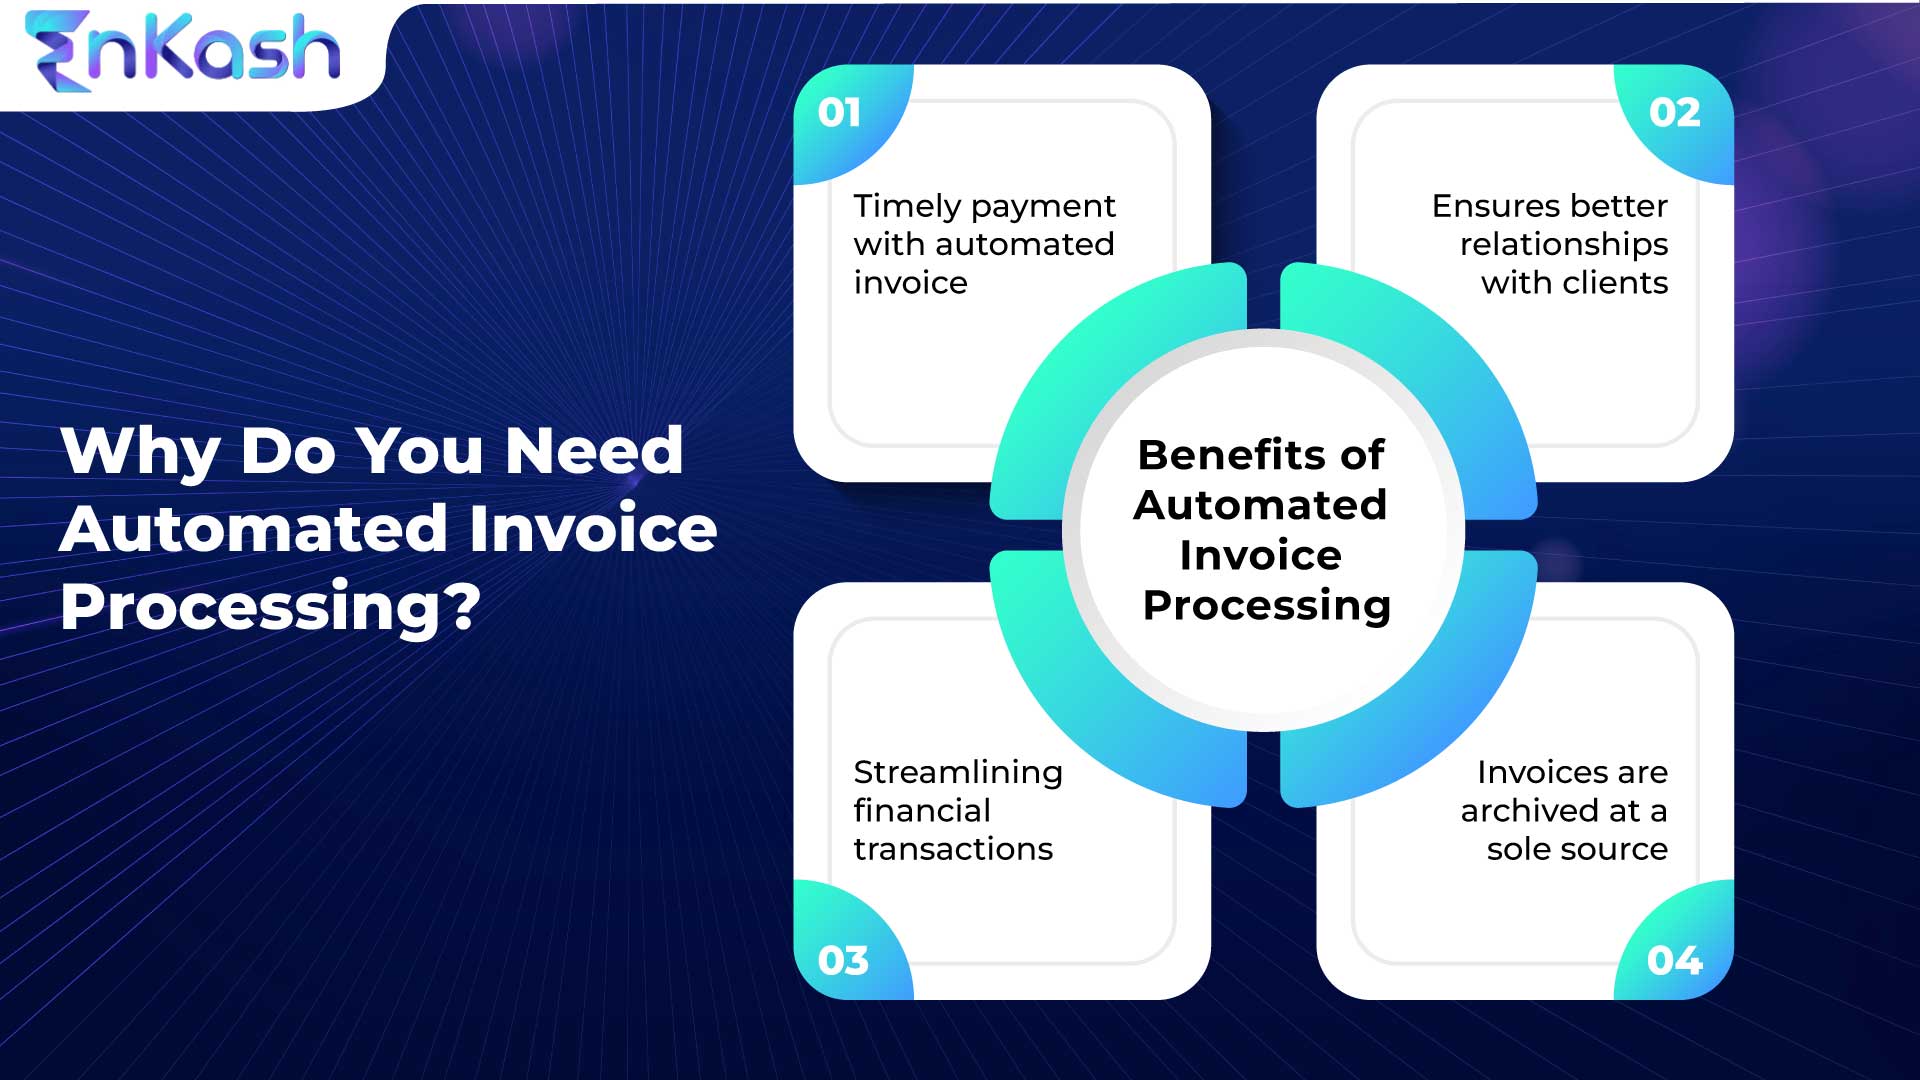 Why do you need automated invoice processing